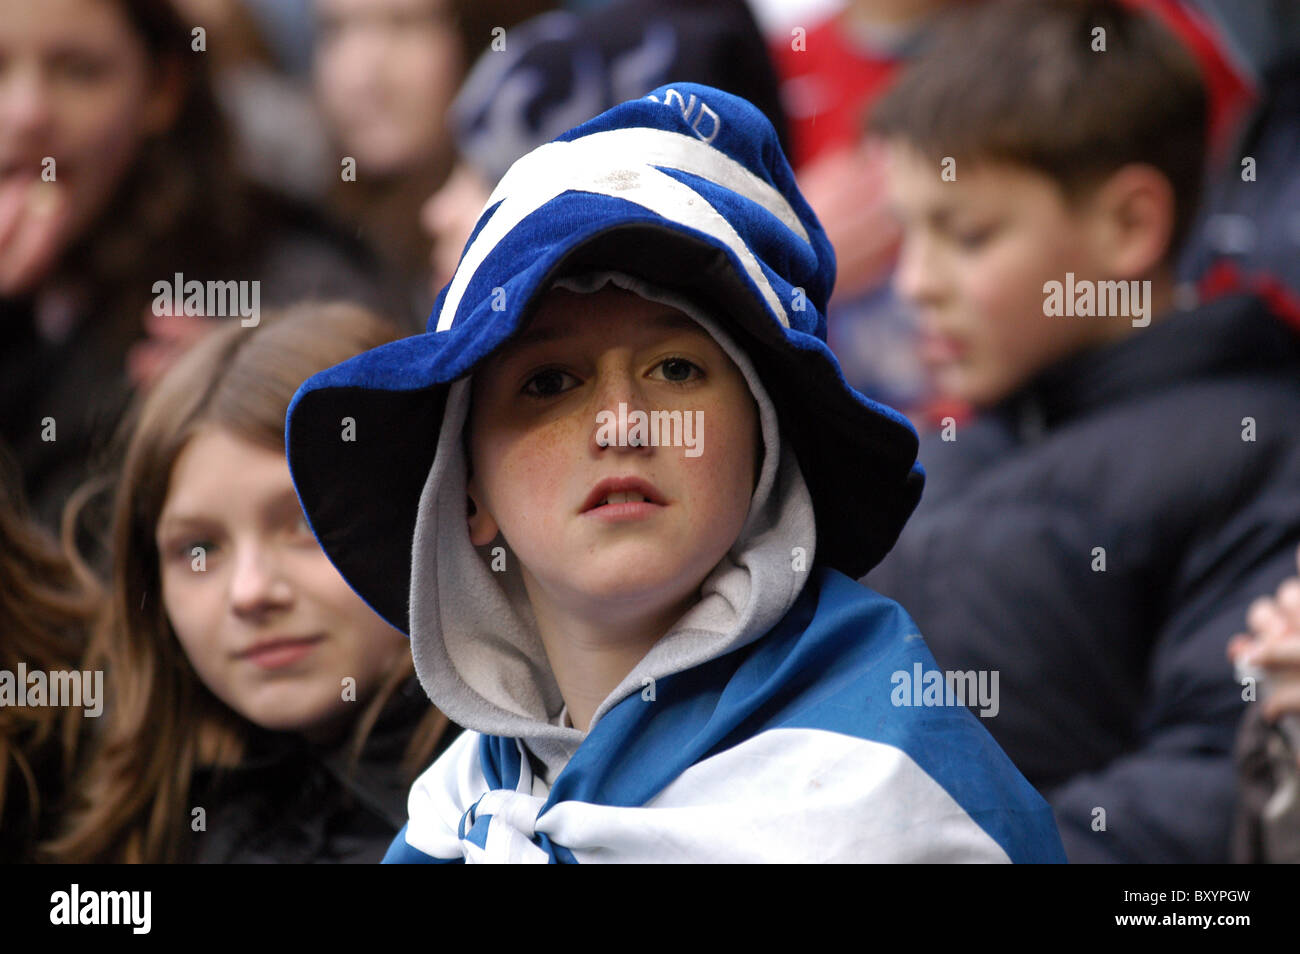 10-12 year old Scotland supporter at Murrayfield Stock Photo